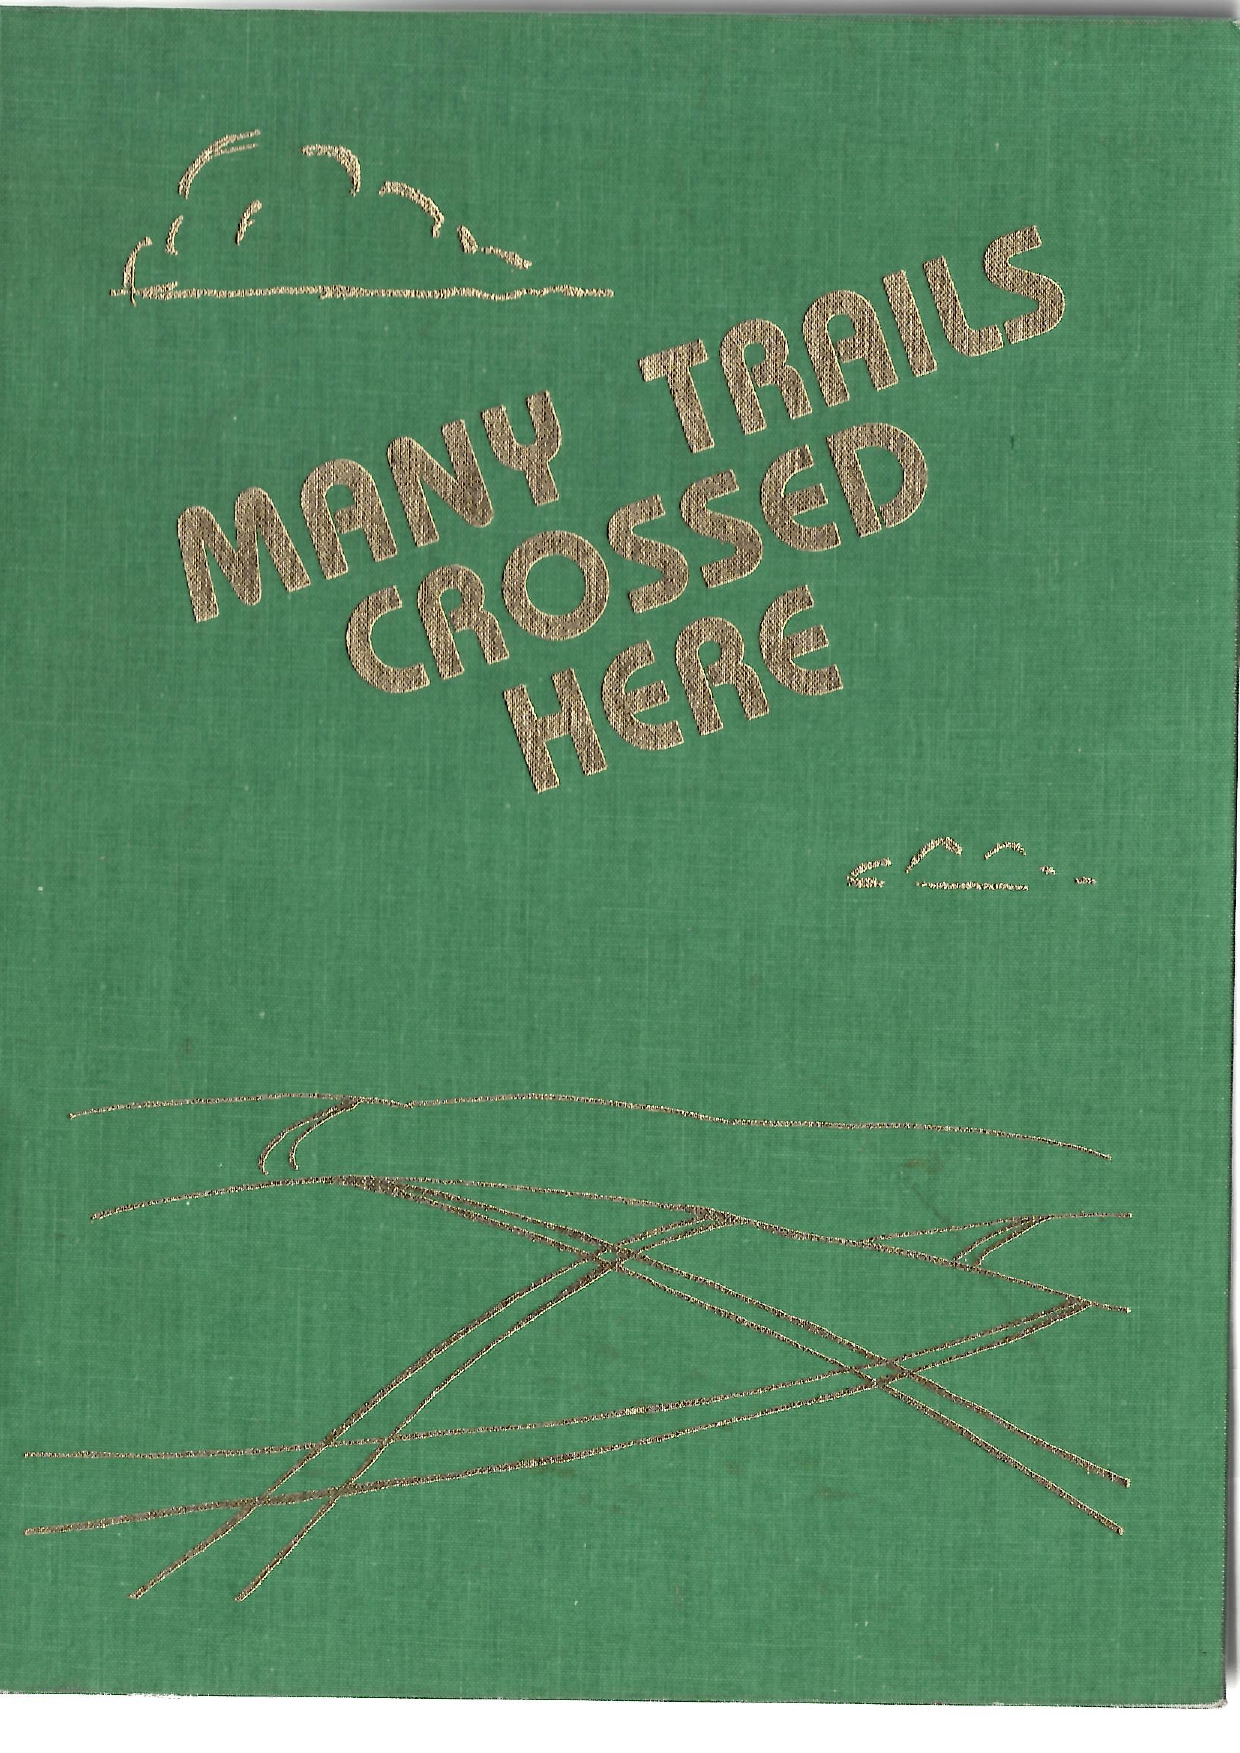 Many Trails Crossed Here